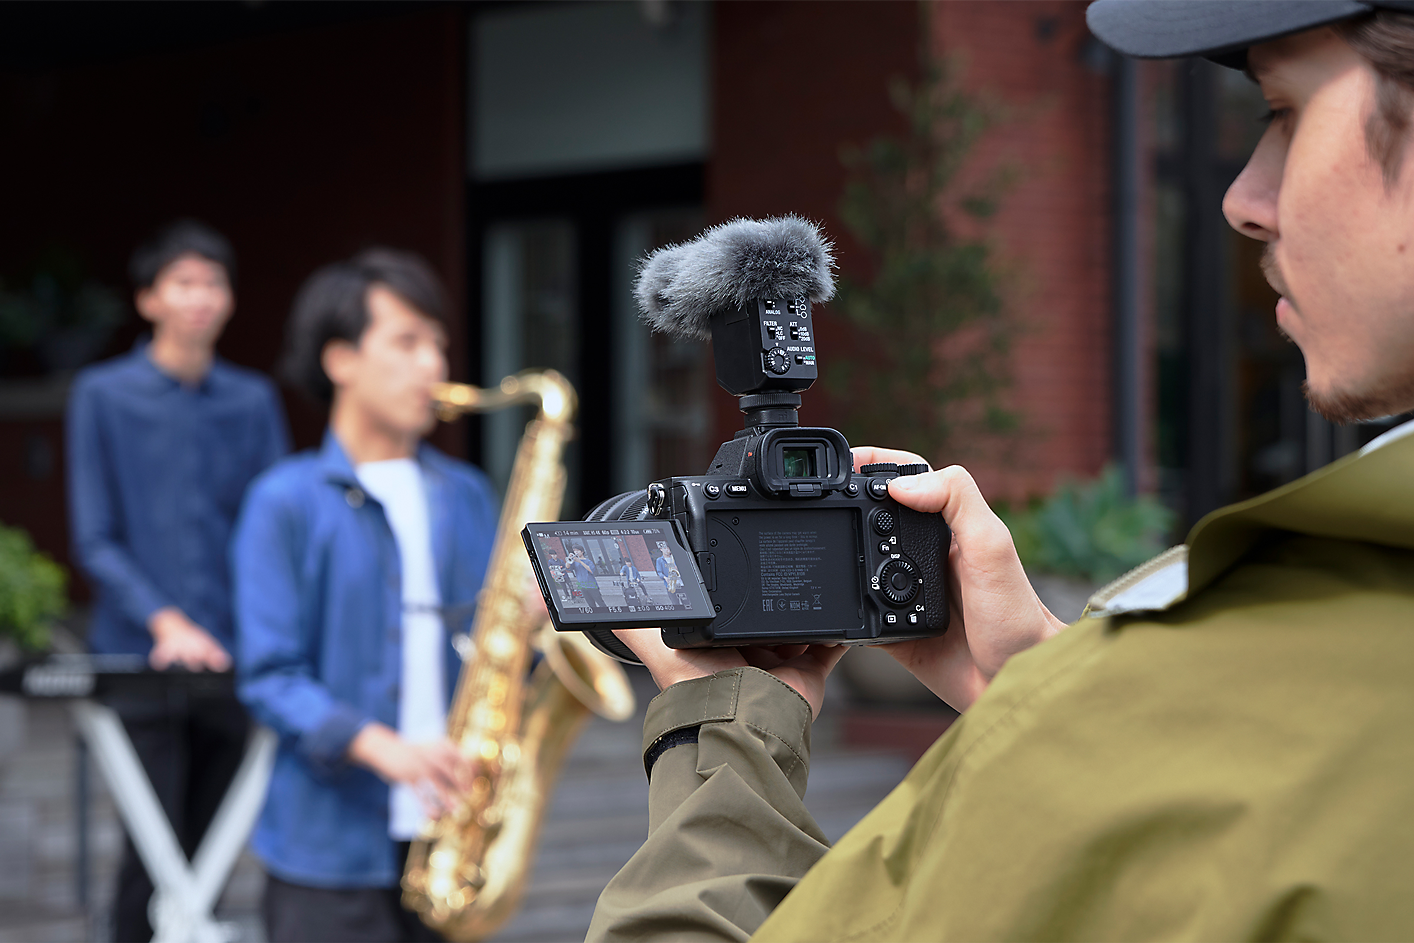 Image of cameraman shooting musicians in unidirectional mode with ECM-B10 attached to the camera.